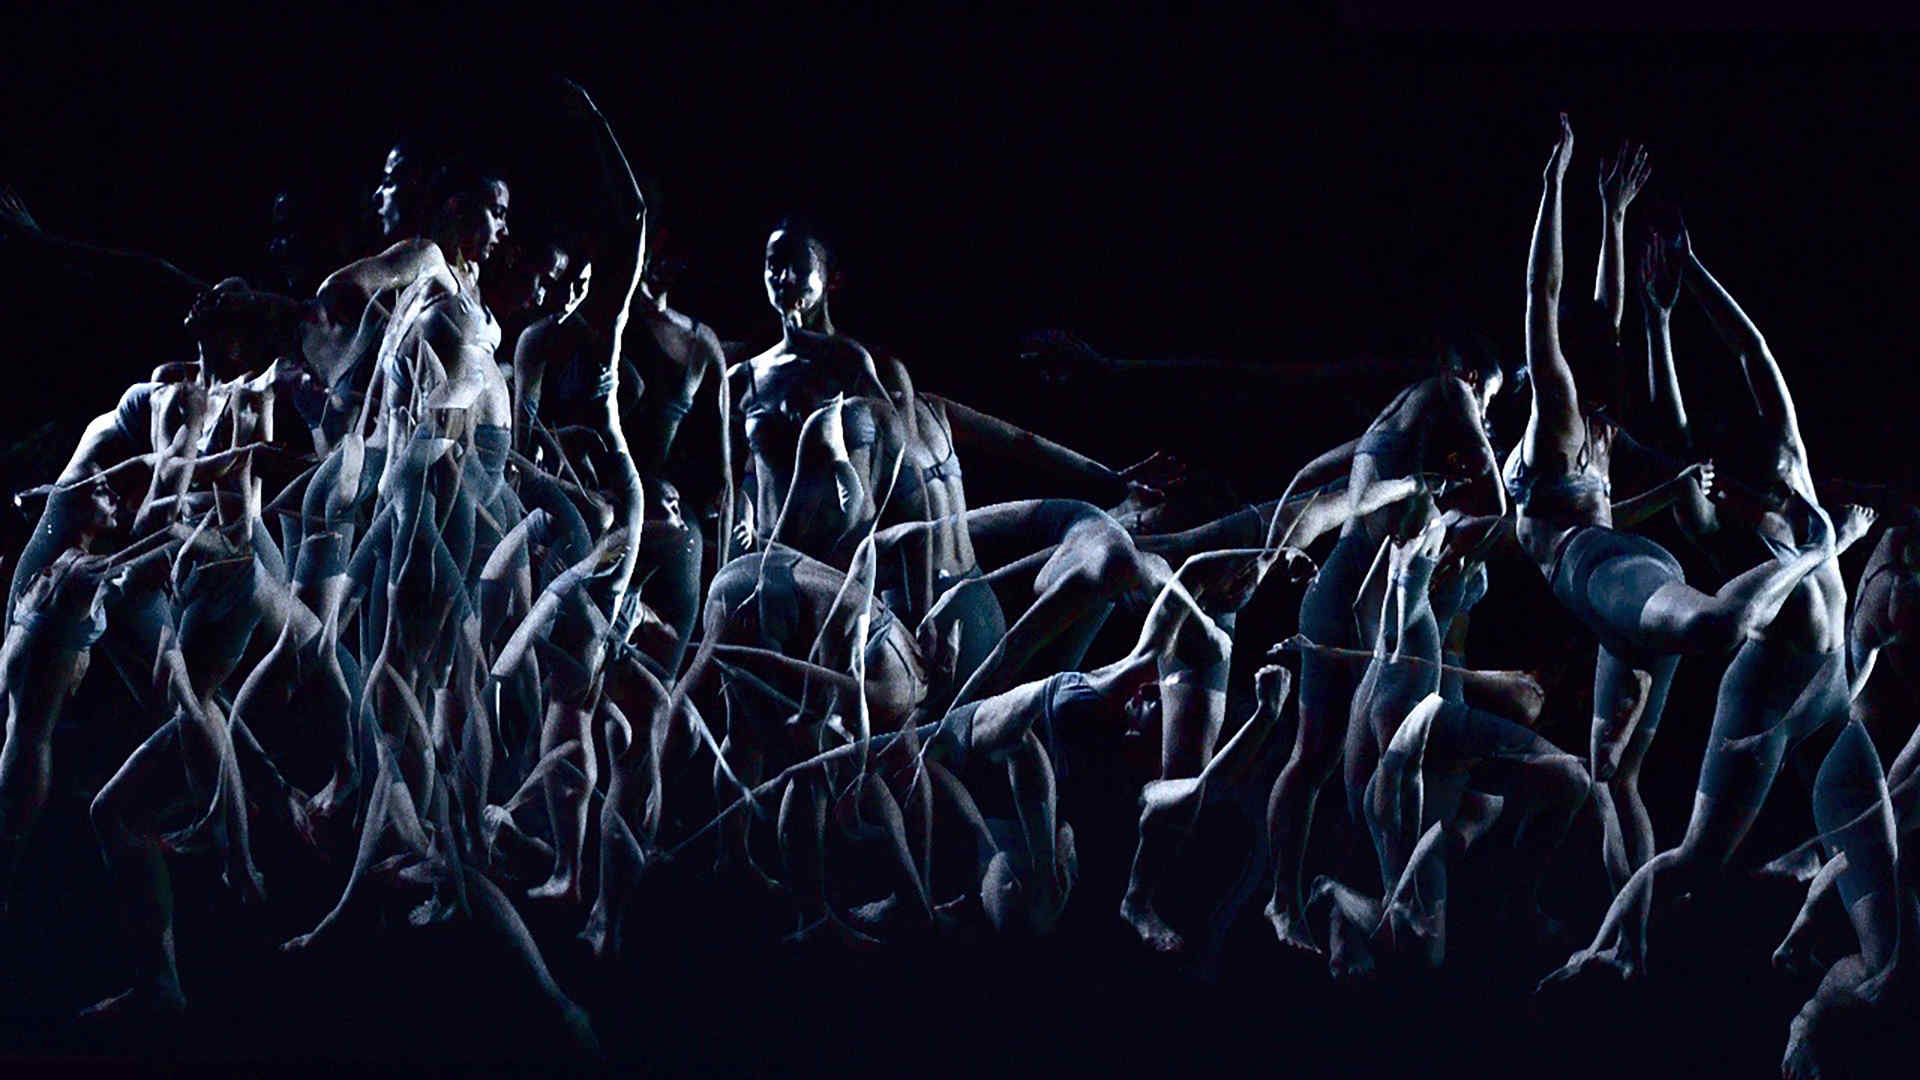 a black and white, abstract computer-generated graphic showing dancers in transparency